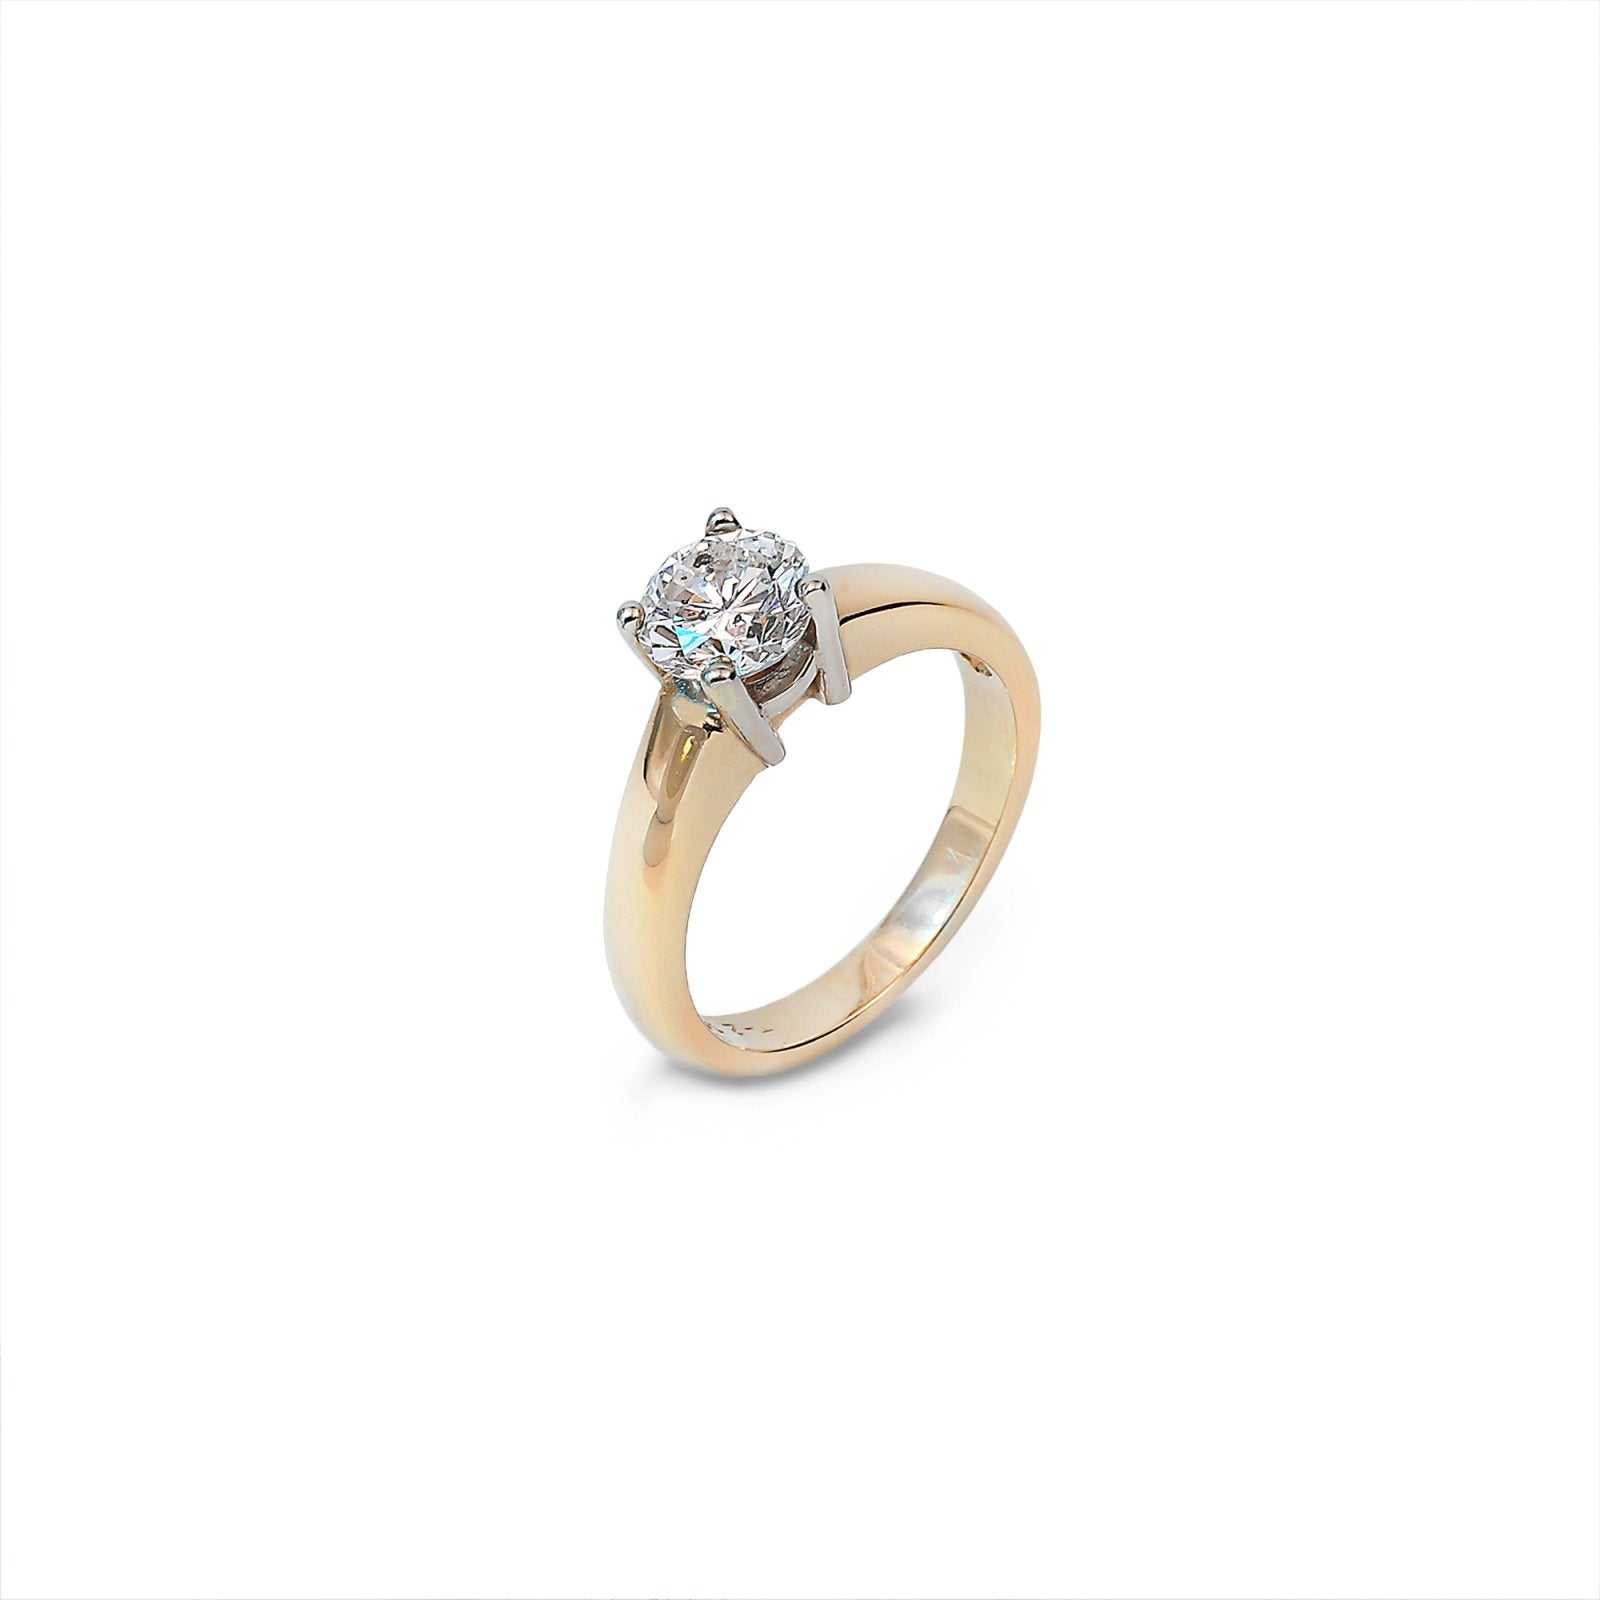 Yellow Gold Diamond Ring One round Natural Diamond on Setting  14k TDW: 1.19 CT   Color: H Clarity:  I1 4.71gr